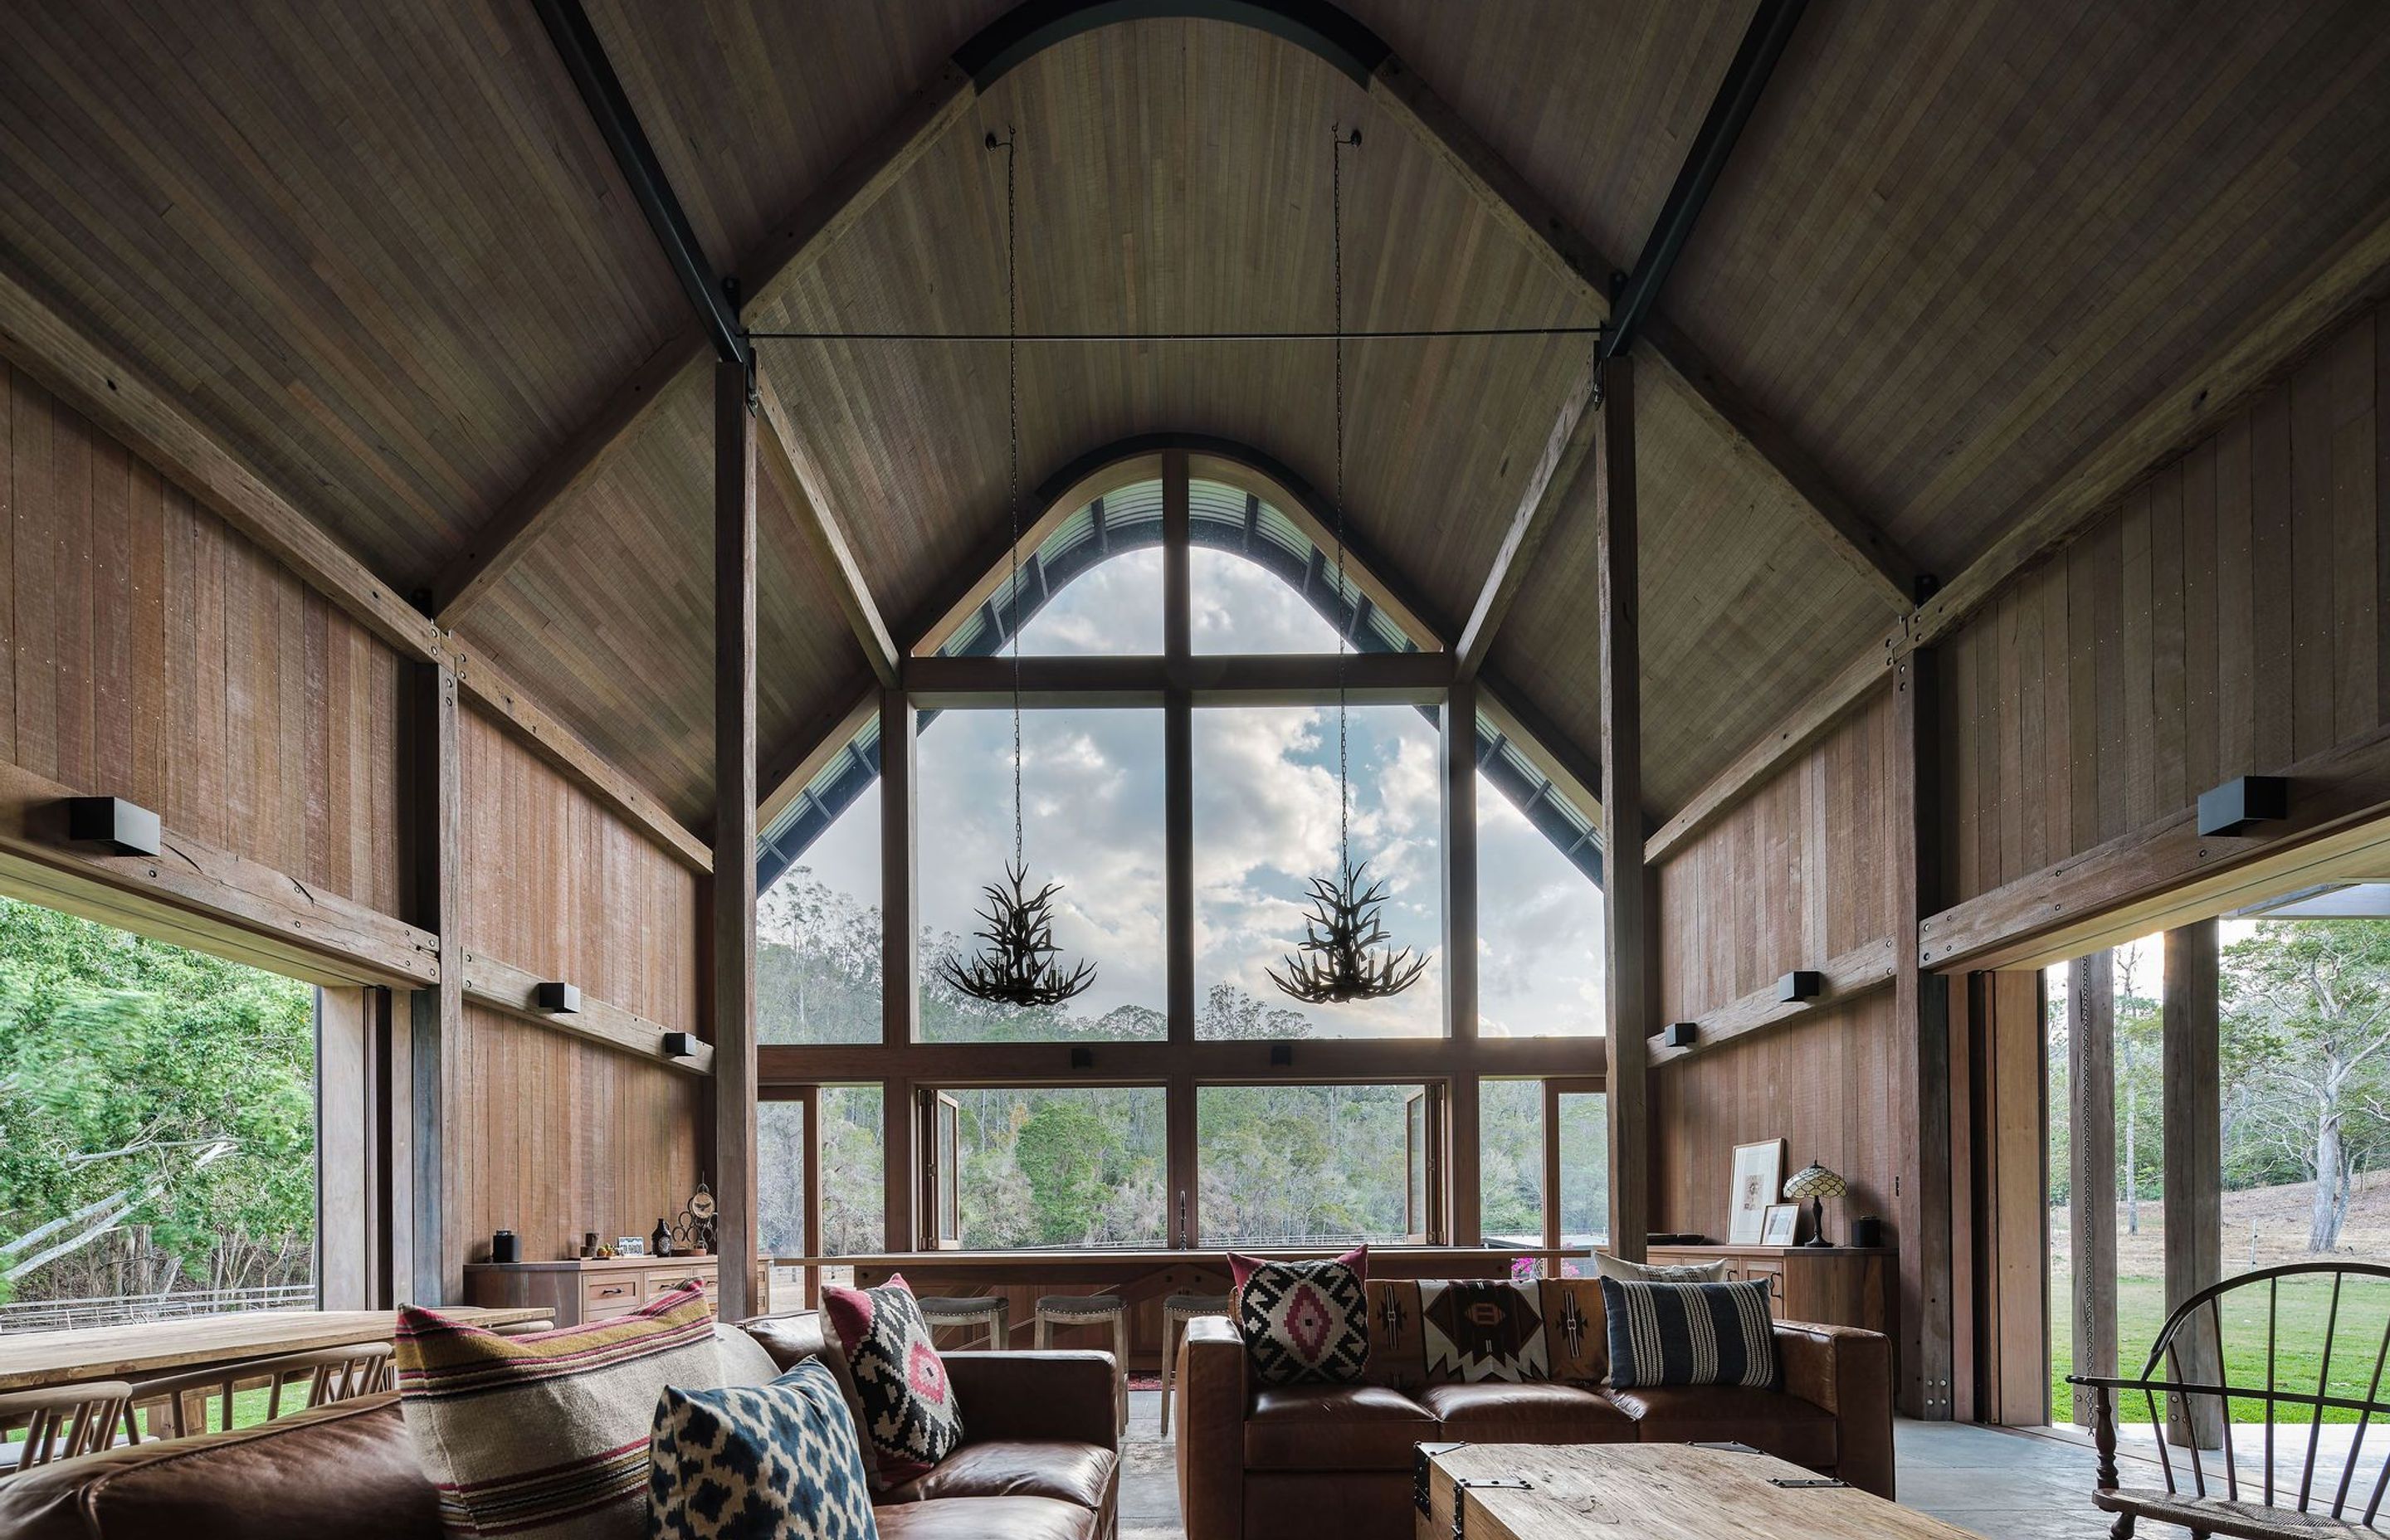 The Barn by Paul Uhlmann Architects | Photography by Andy Macpherson Studio